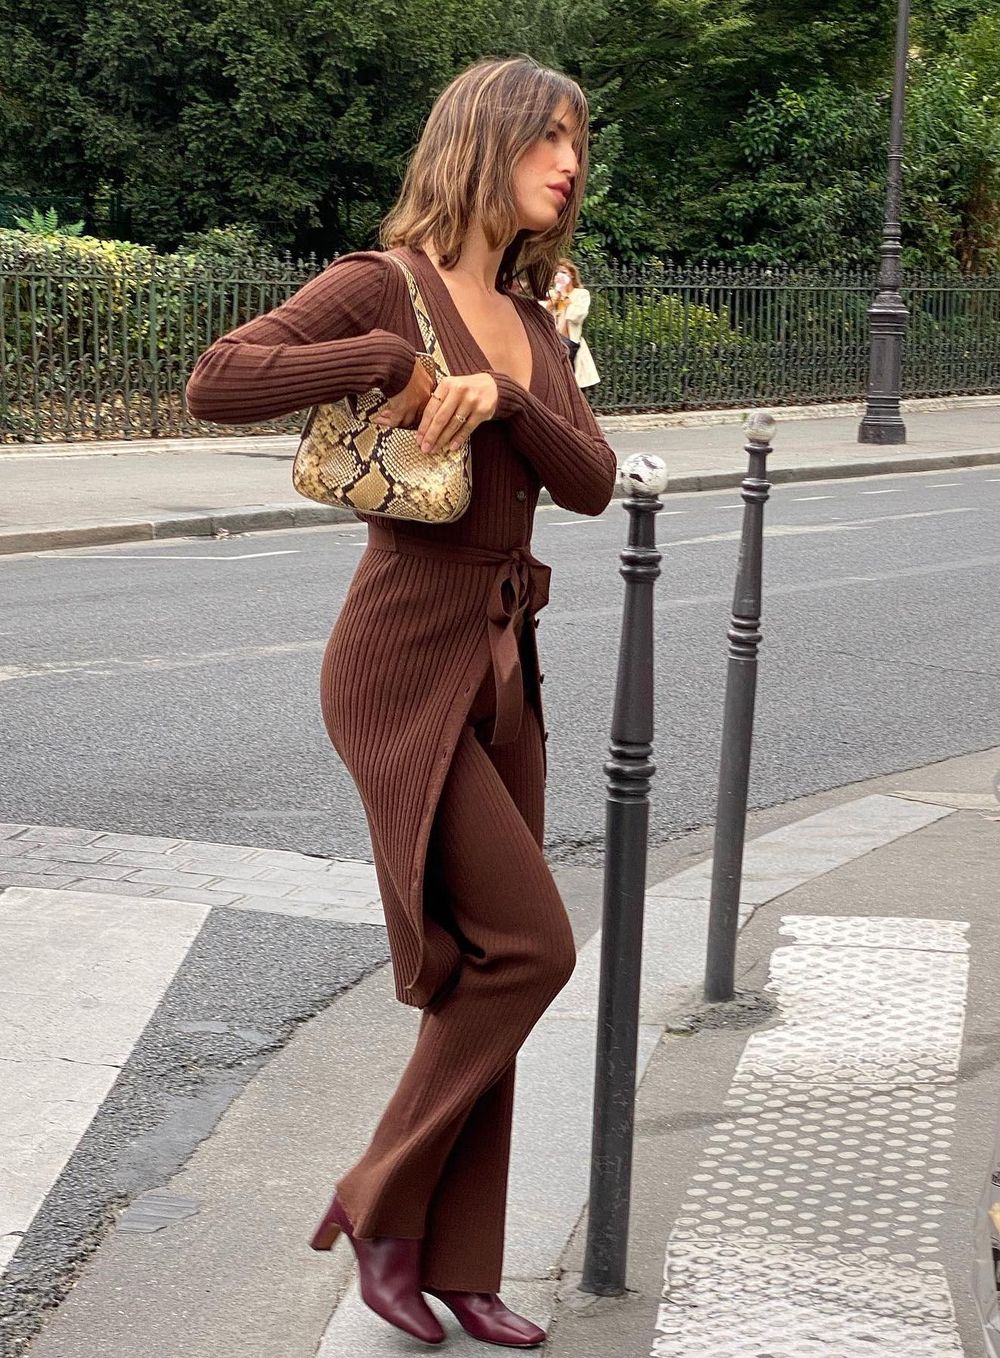 French girl Fall outfits brown knitwear jeanne damas